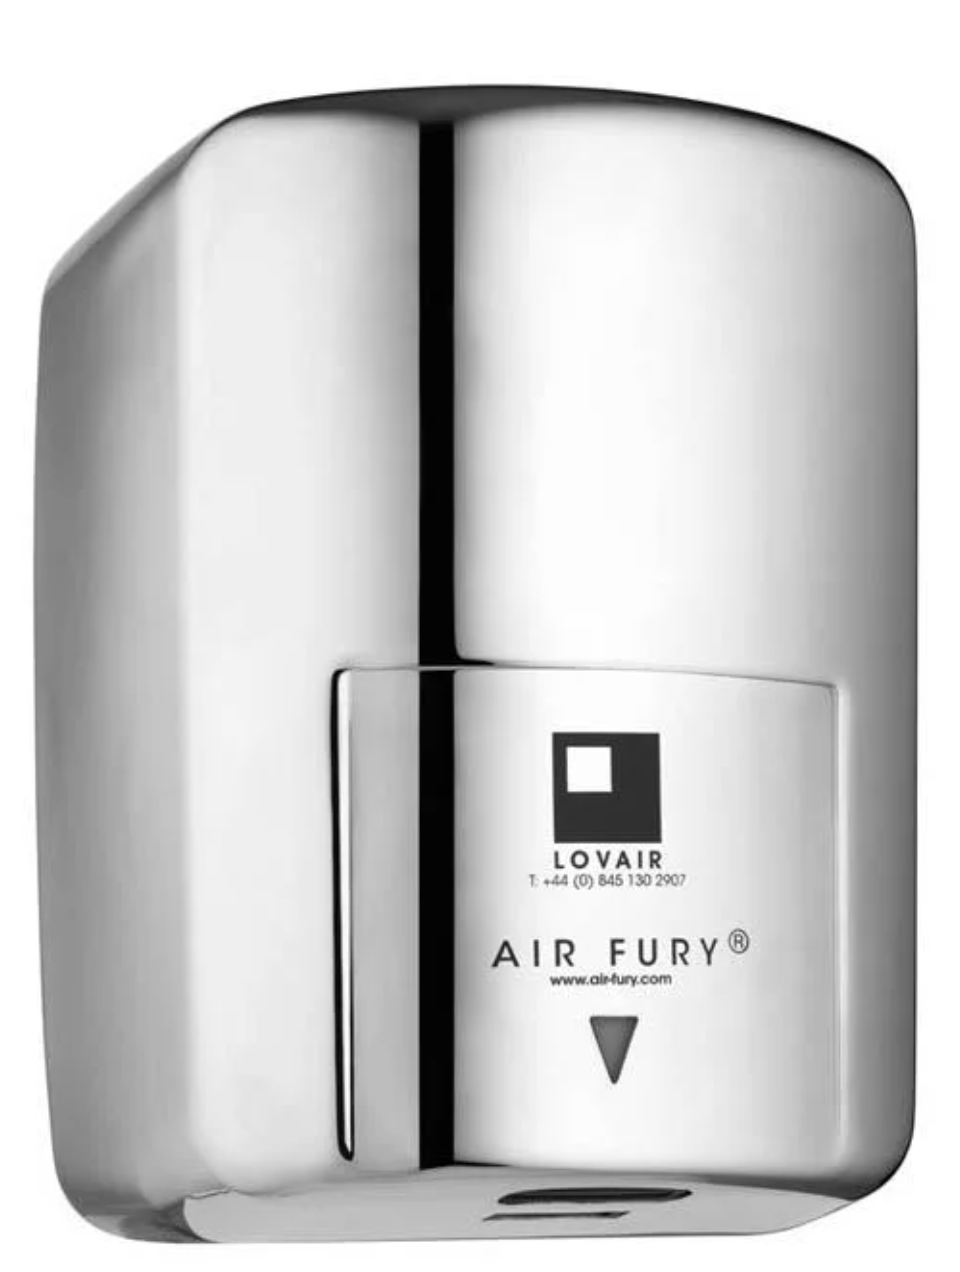 Lovair AirFury Polished Stainless Steel Hand Dryer - L89AC